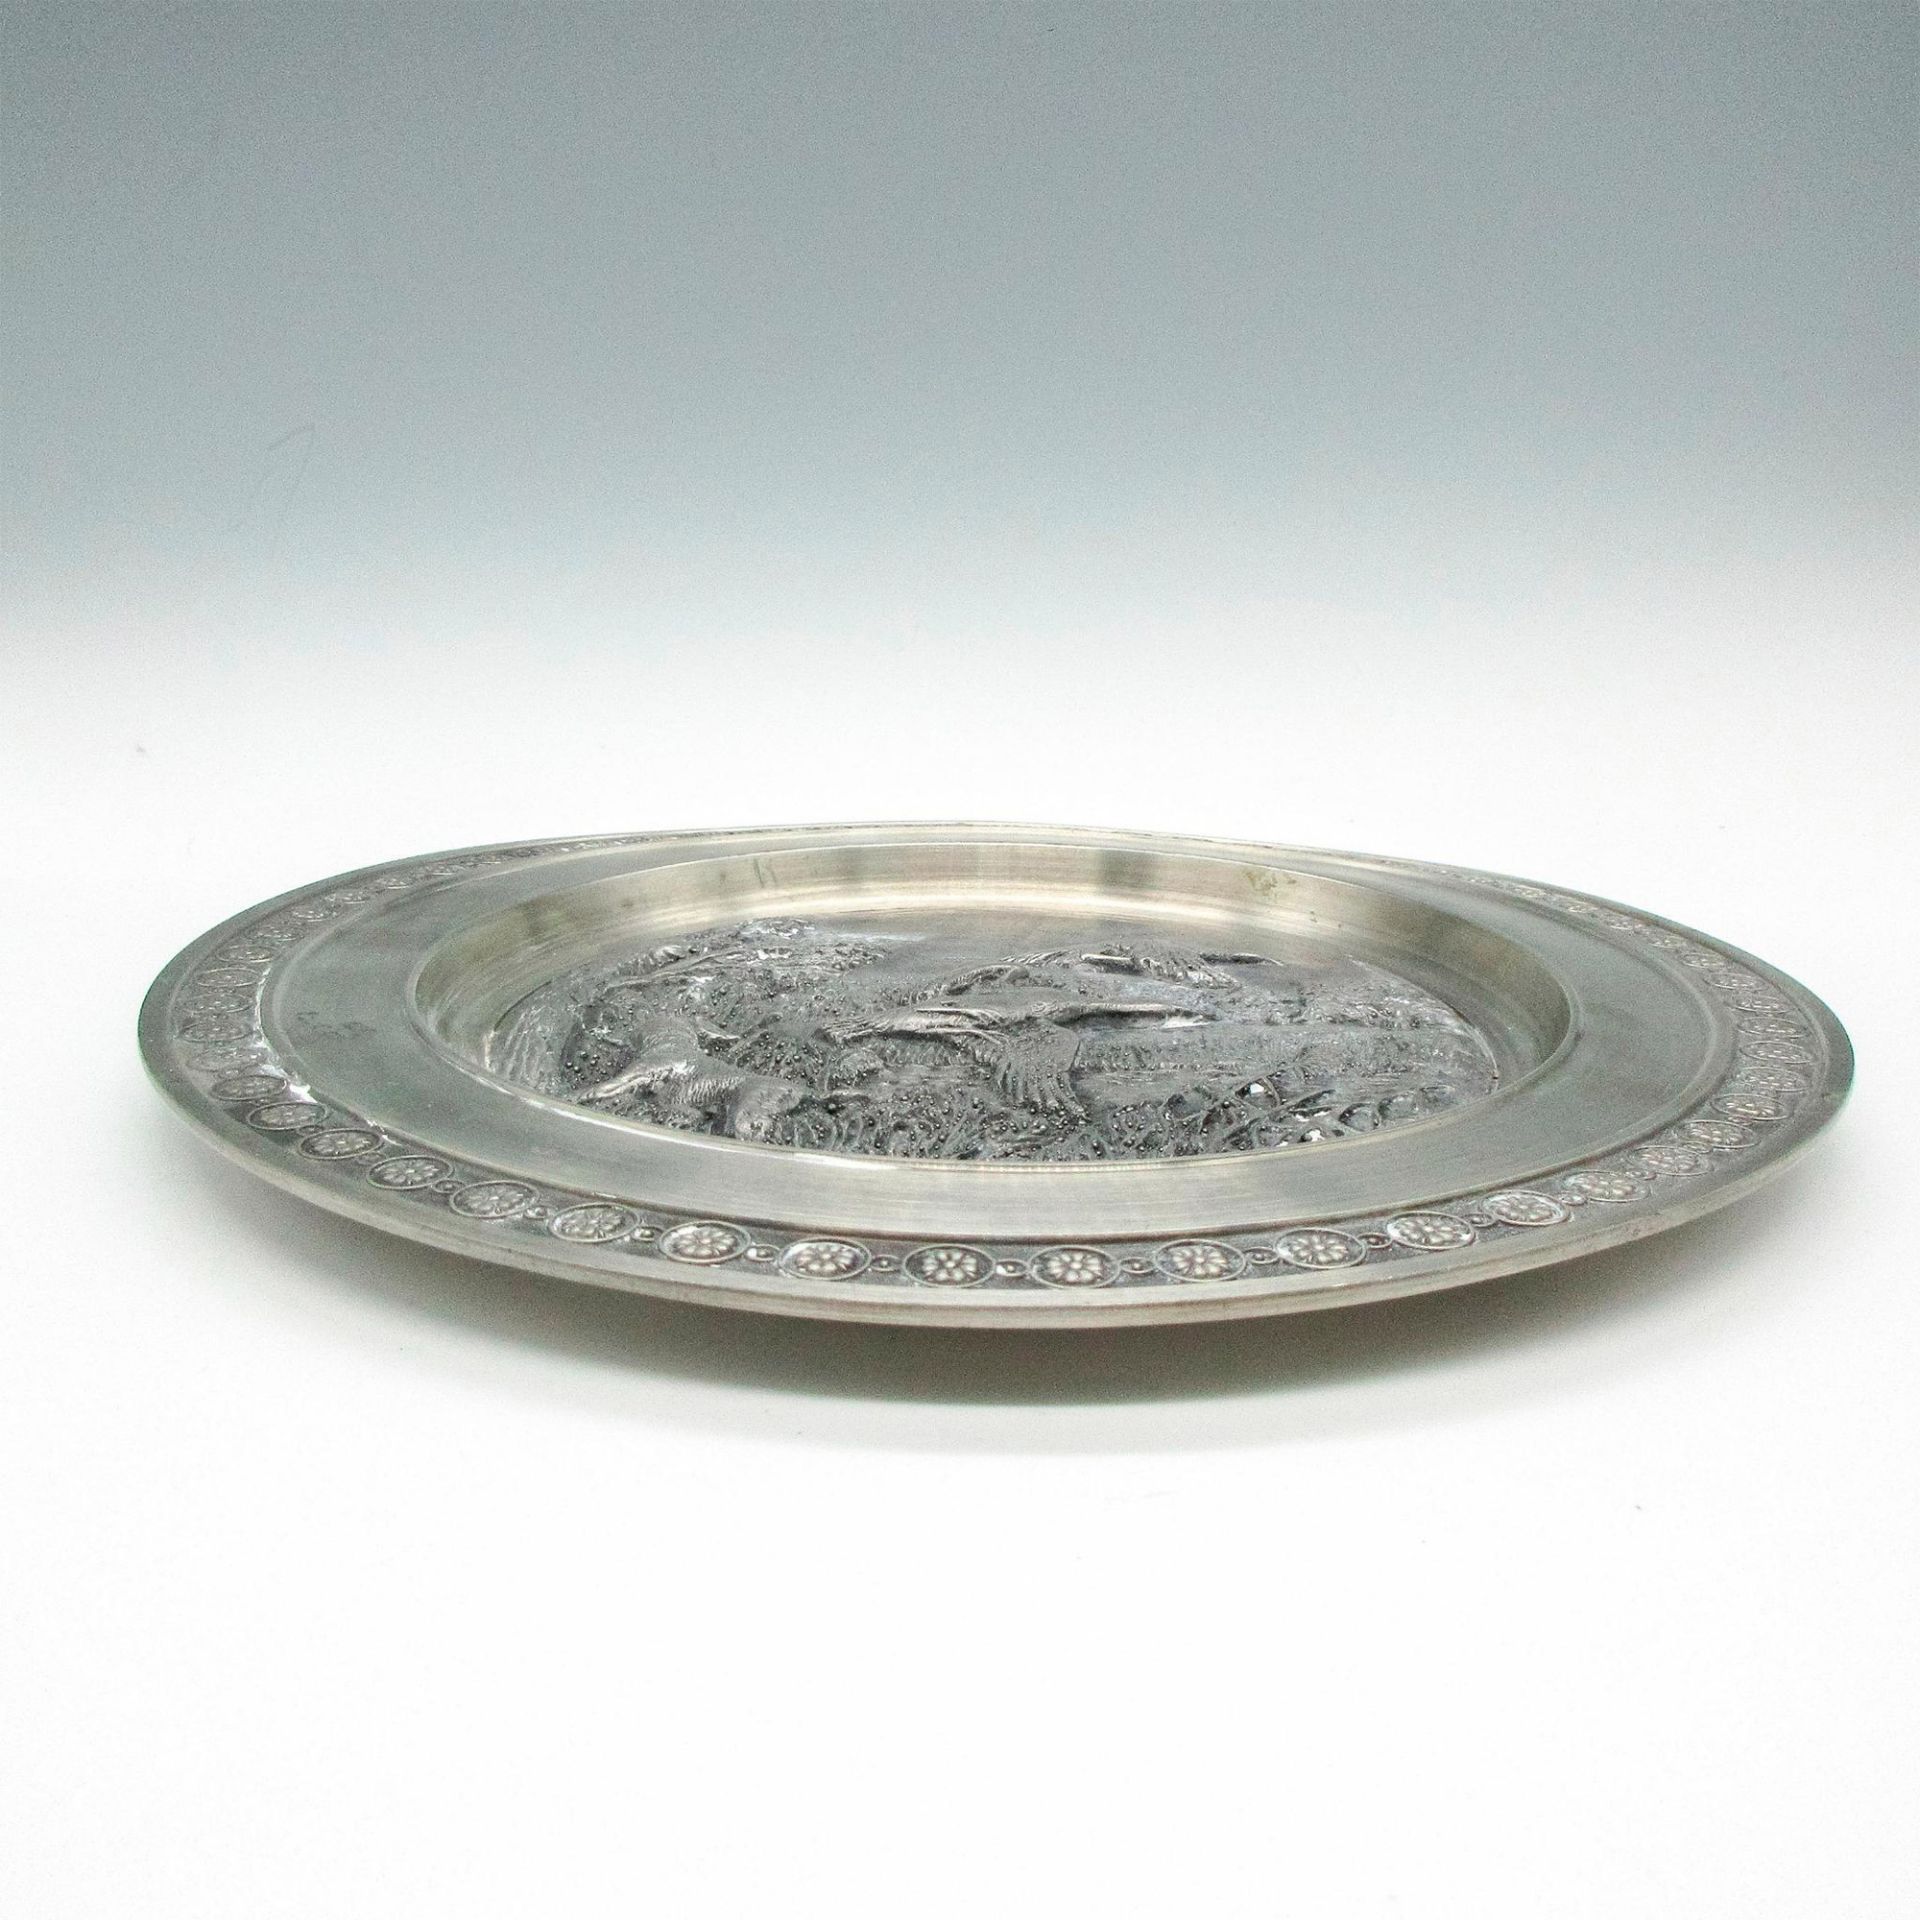 Pewter Designs Unlimited, Plate with Ducks - Image 3 of 3